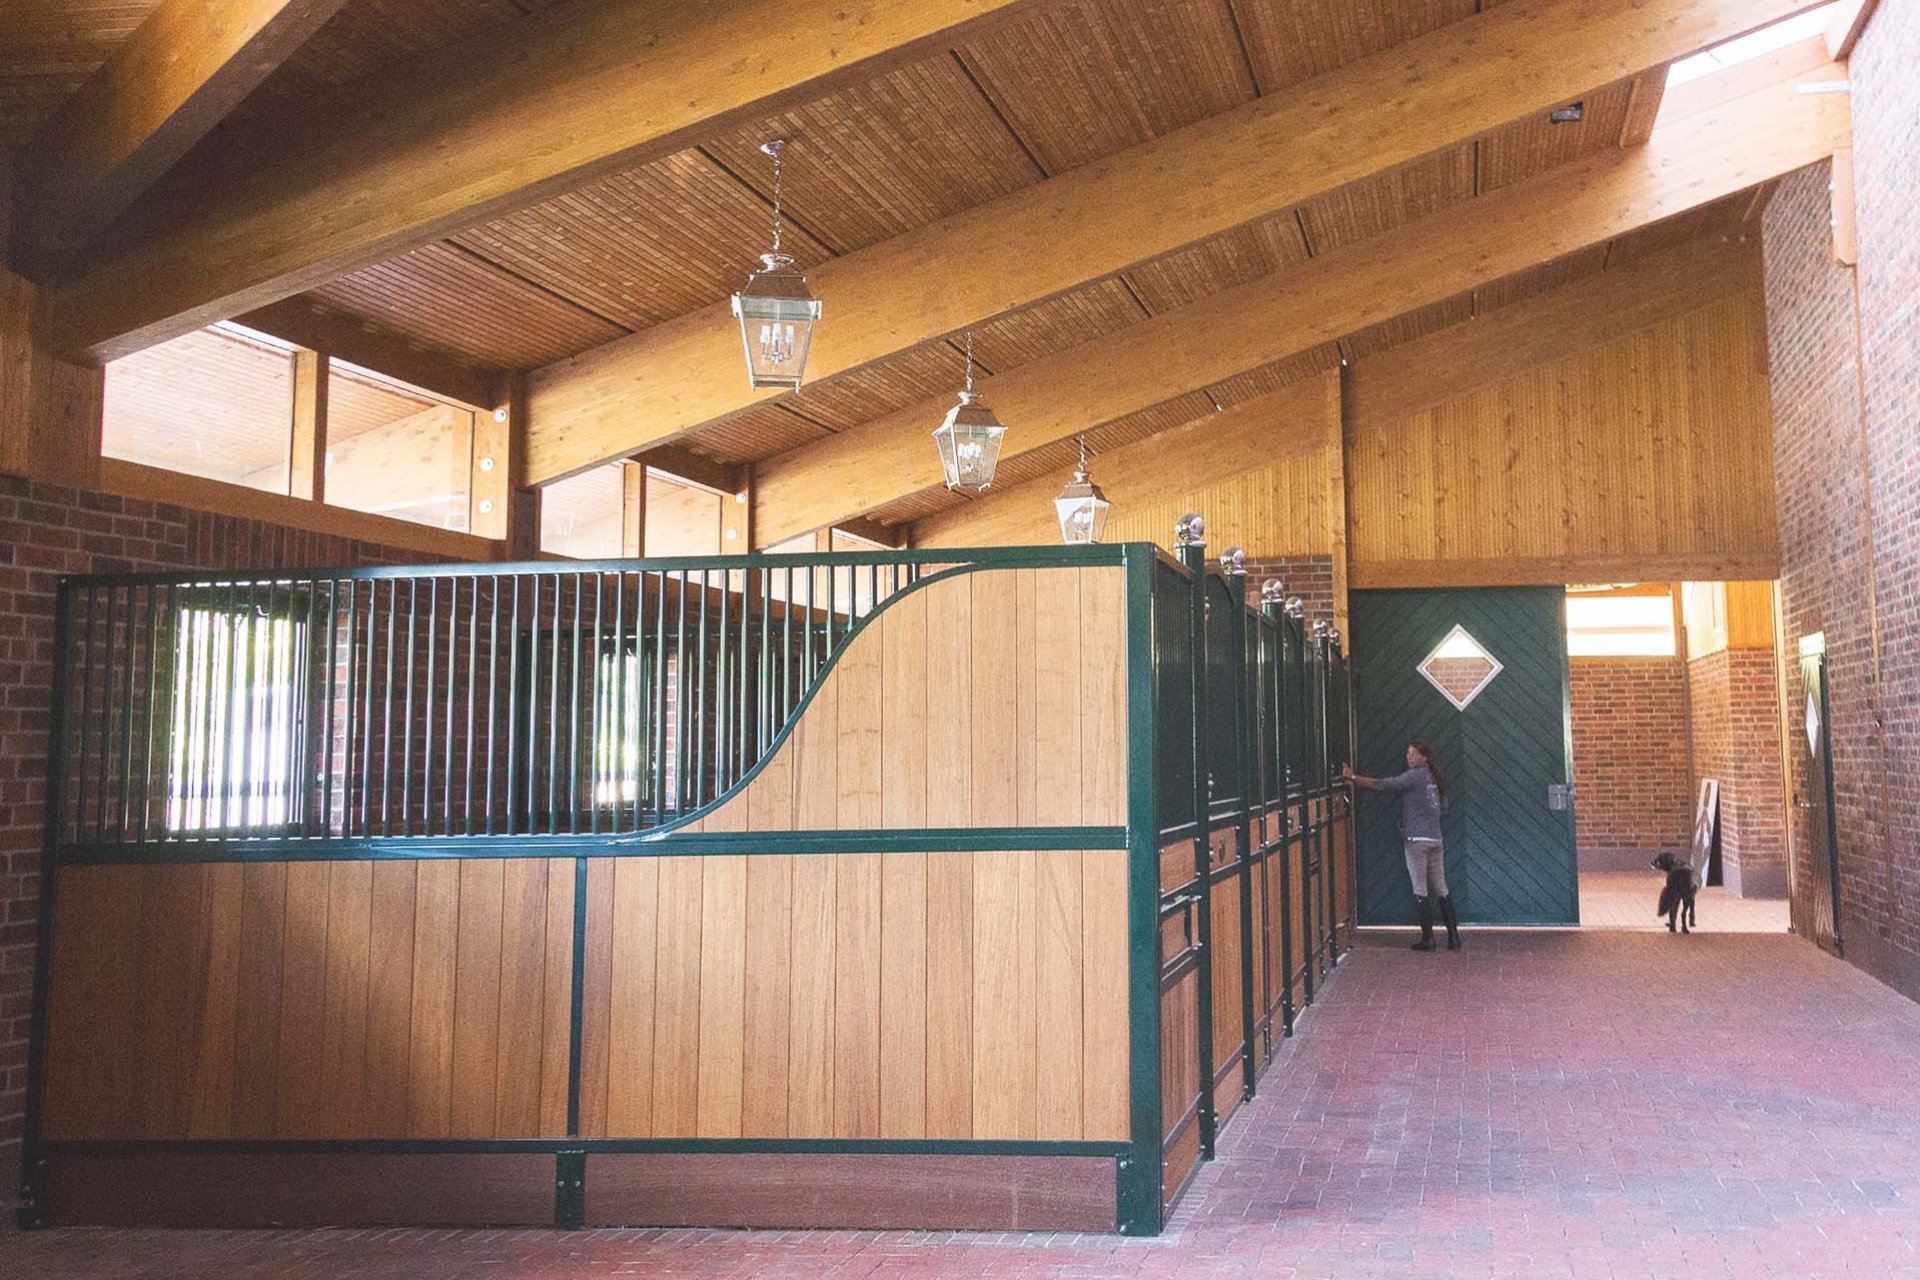 Image horse stall stable partitions (M000067090)